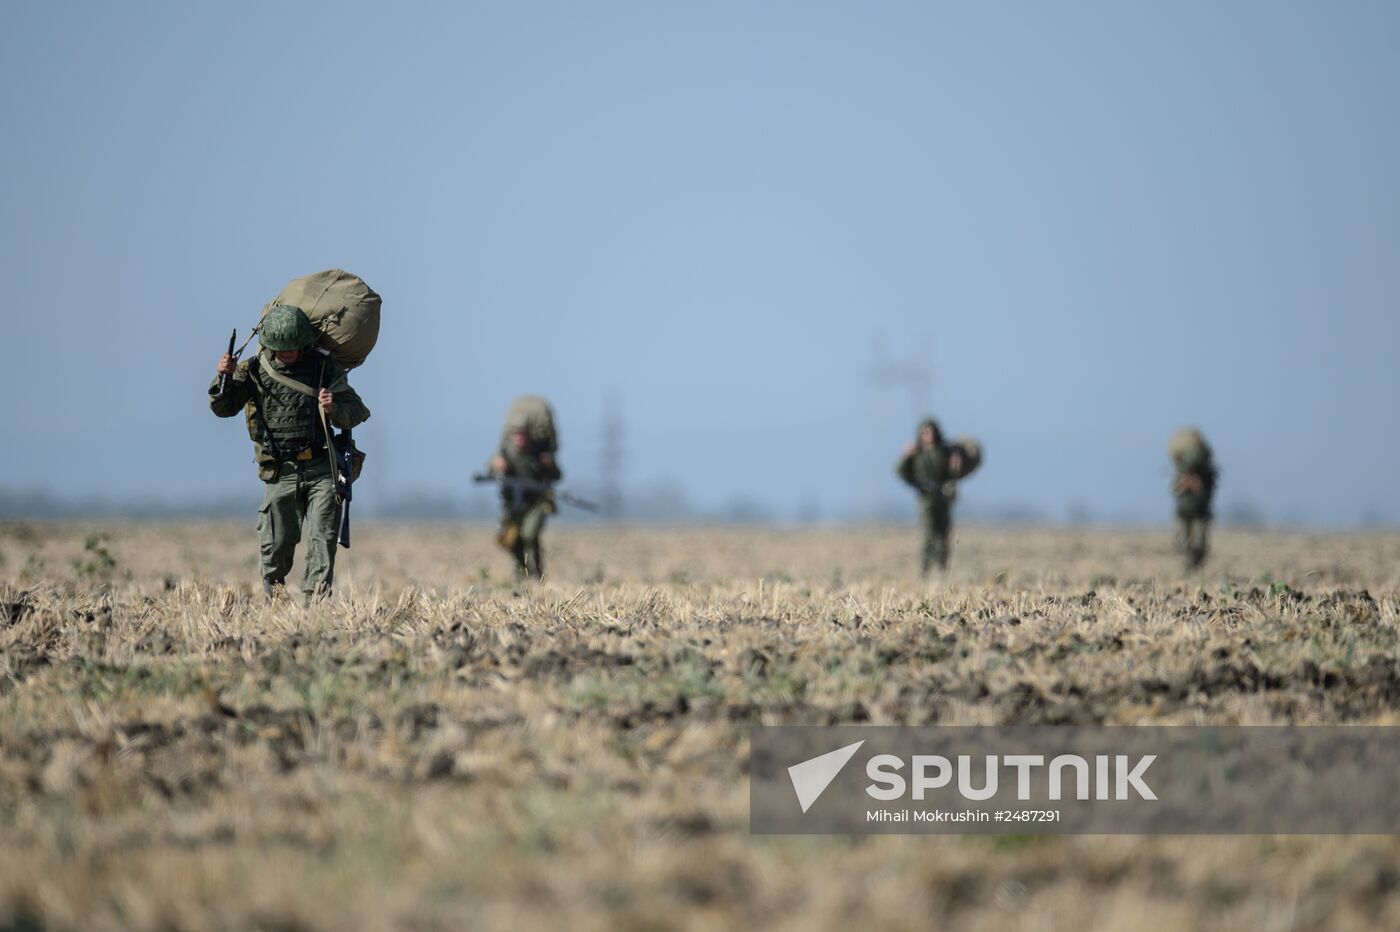 A joint Russian-Belarusian tactical exercise in the Krasnodar Territory